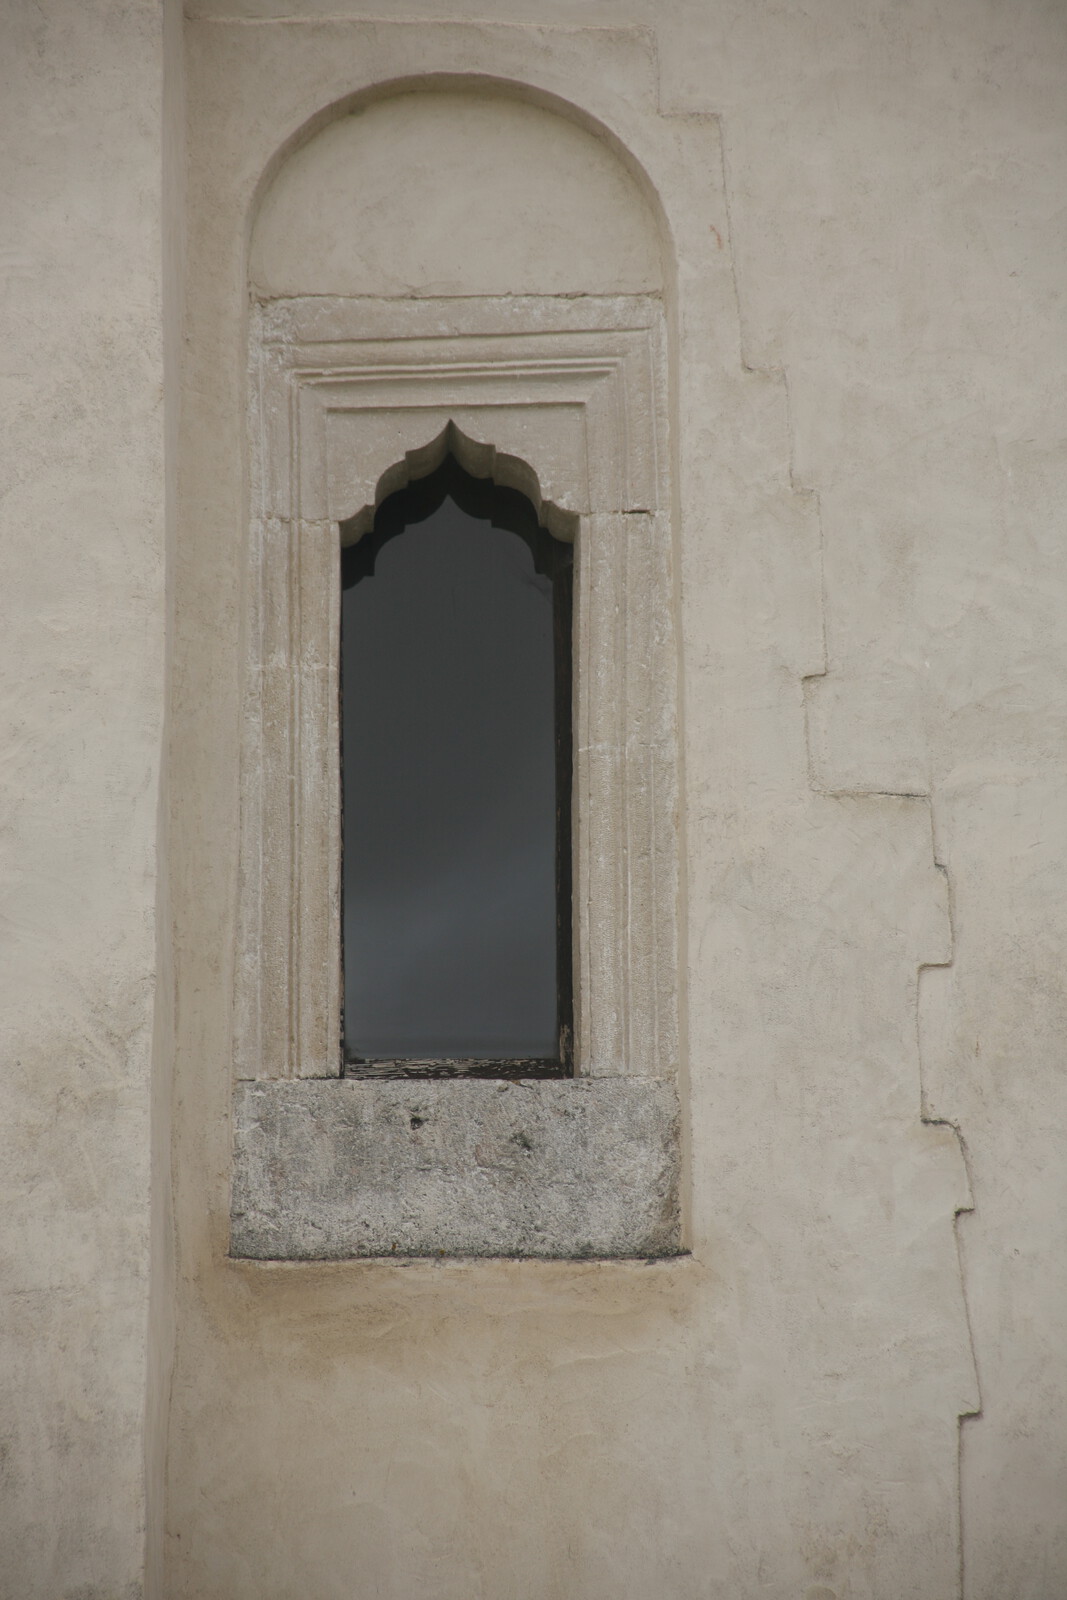 Window on the northern wall of the narthex